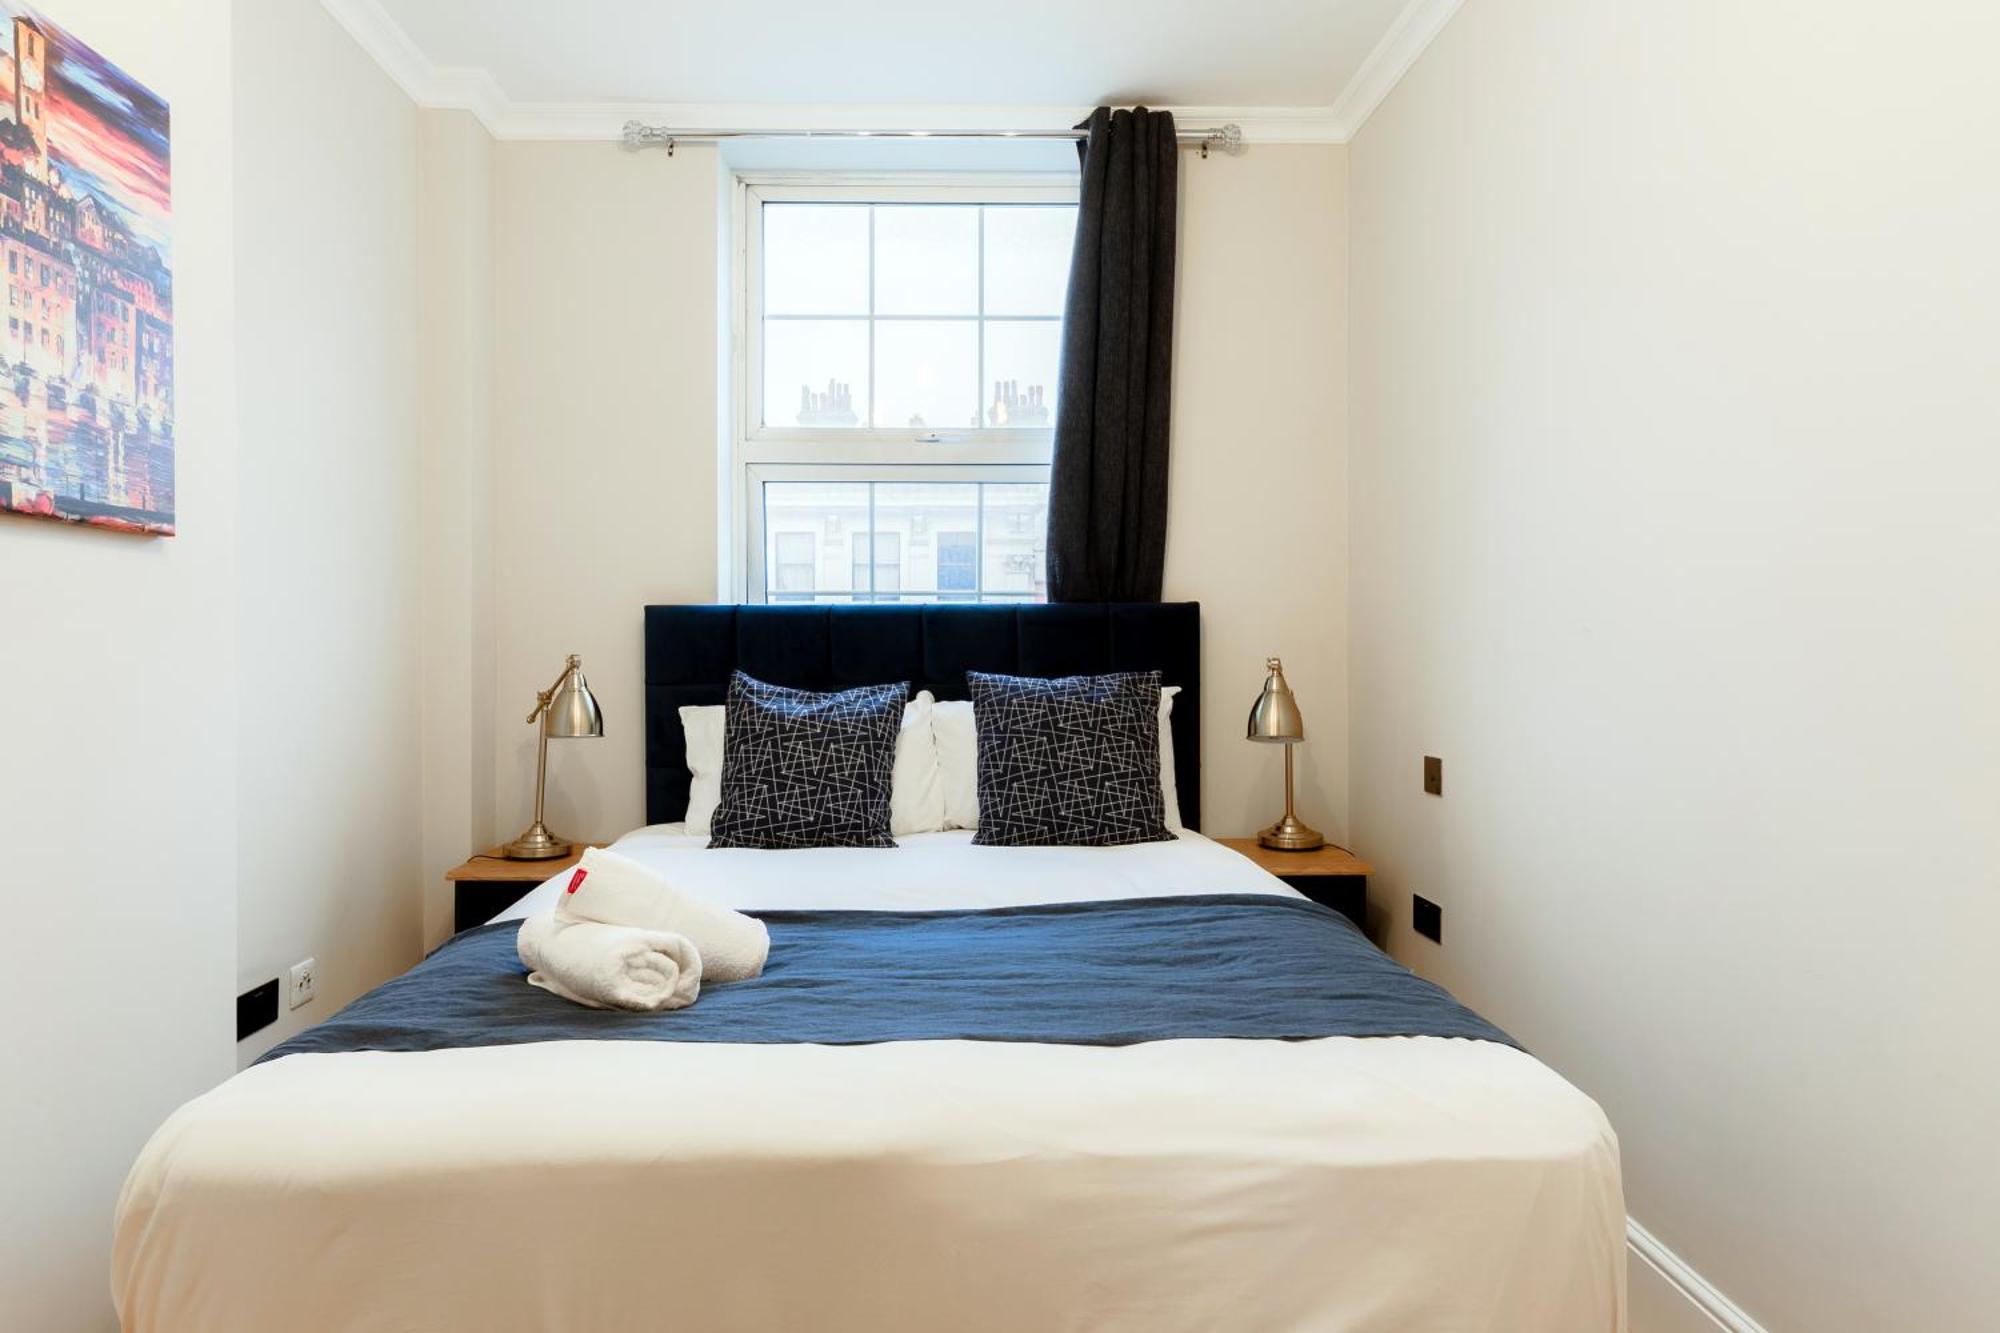 Bright One Bedroom Flats Near Marble Arch And Hyde Park 伦敦 客房 照片